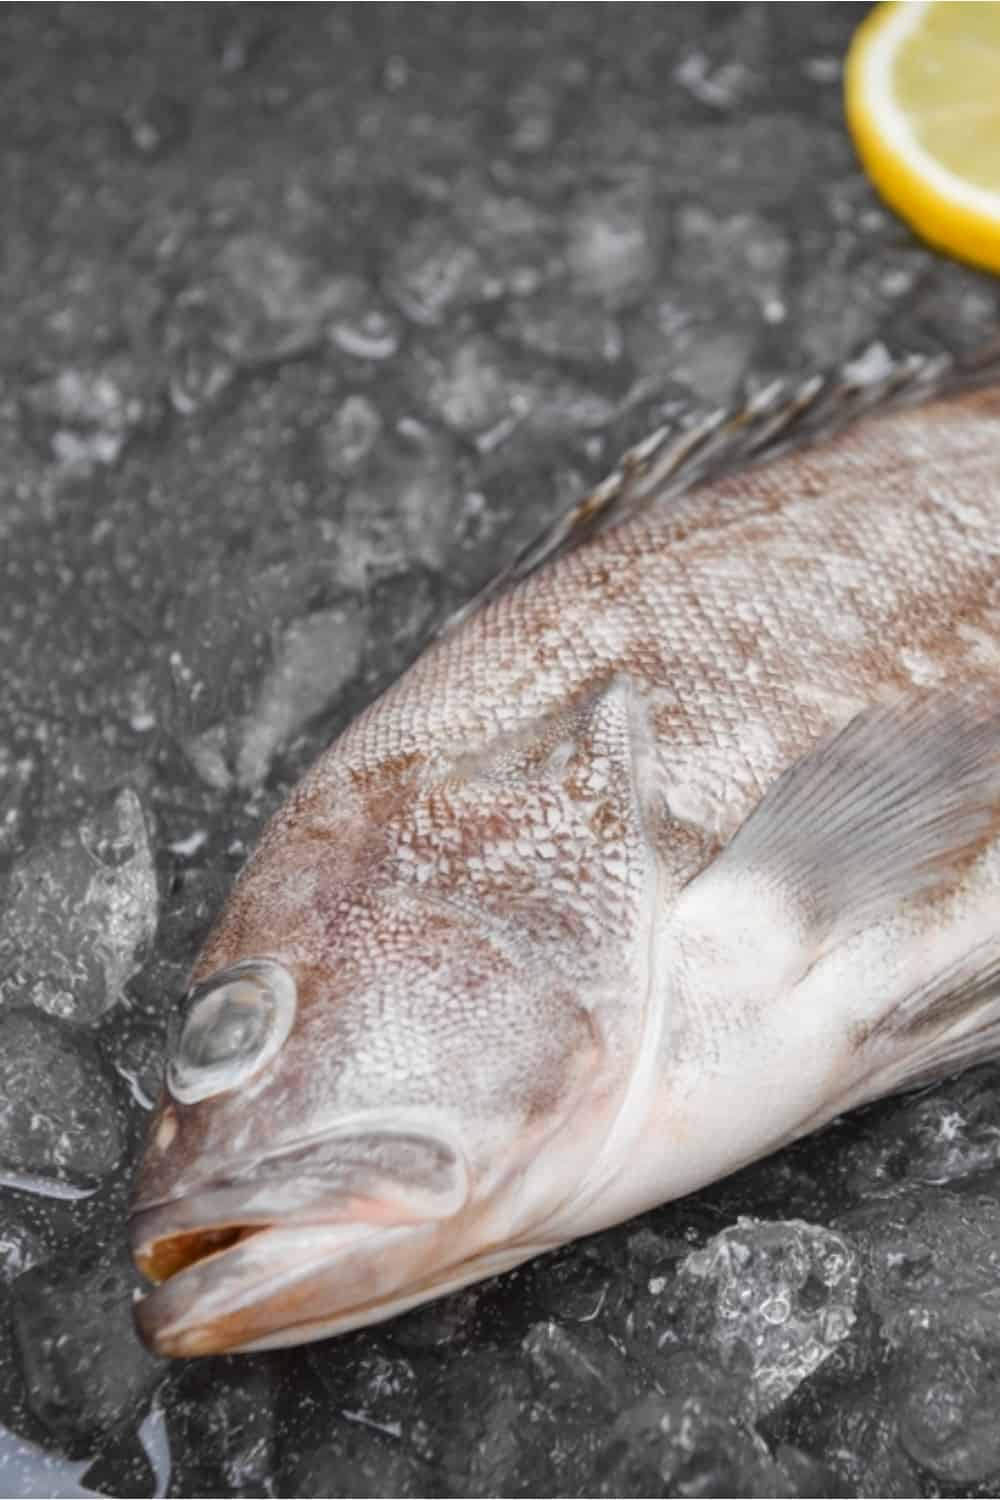 Grouper fish with ice and lemon